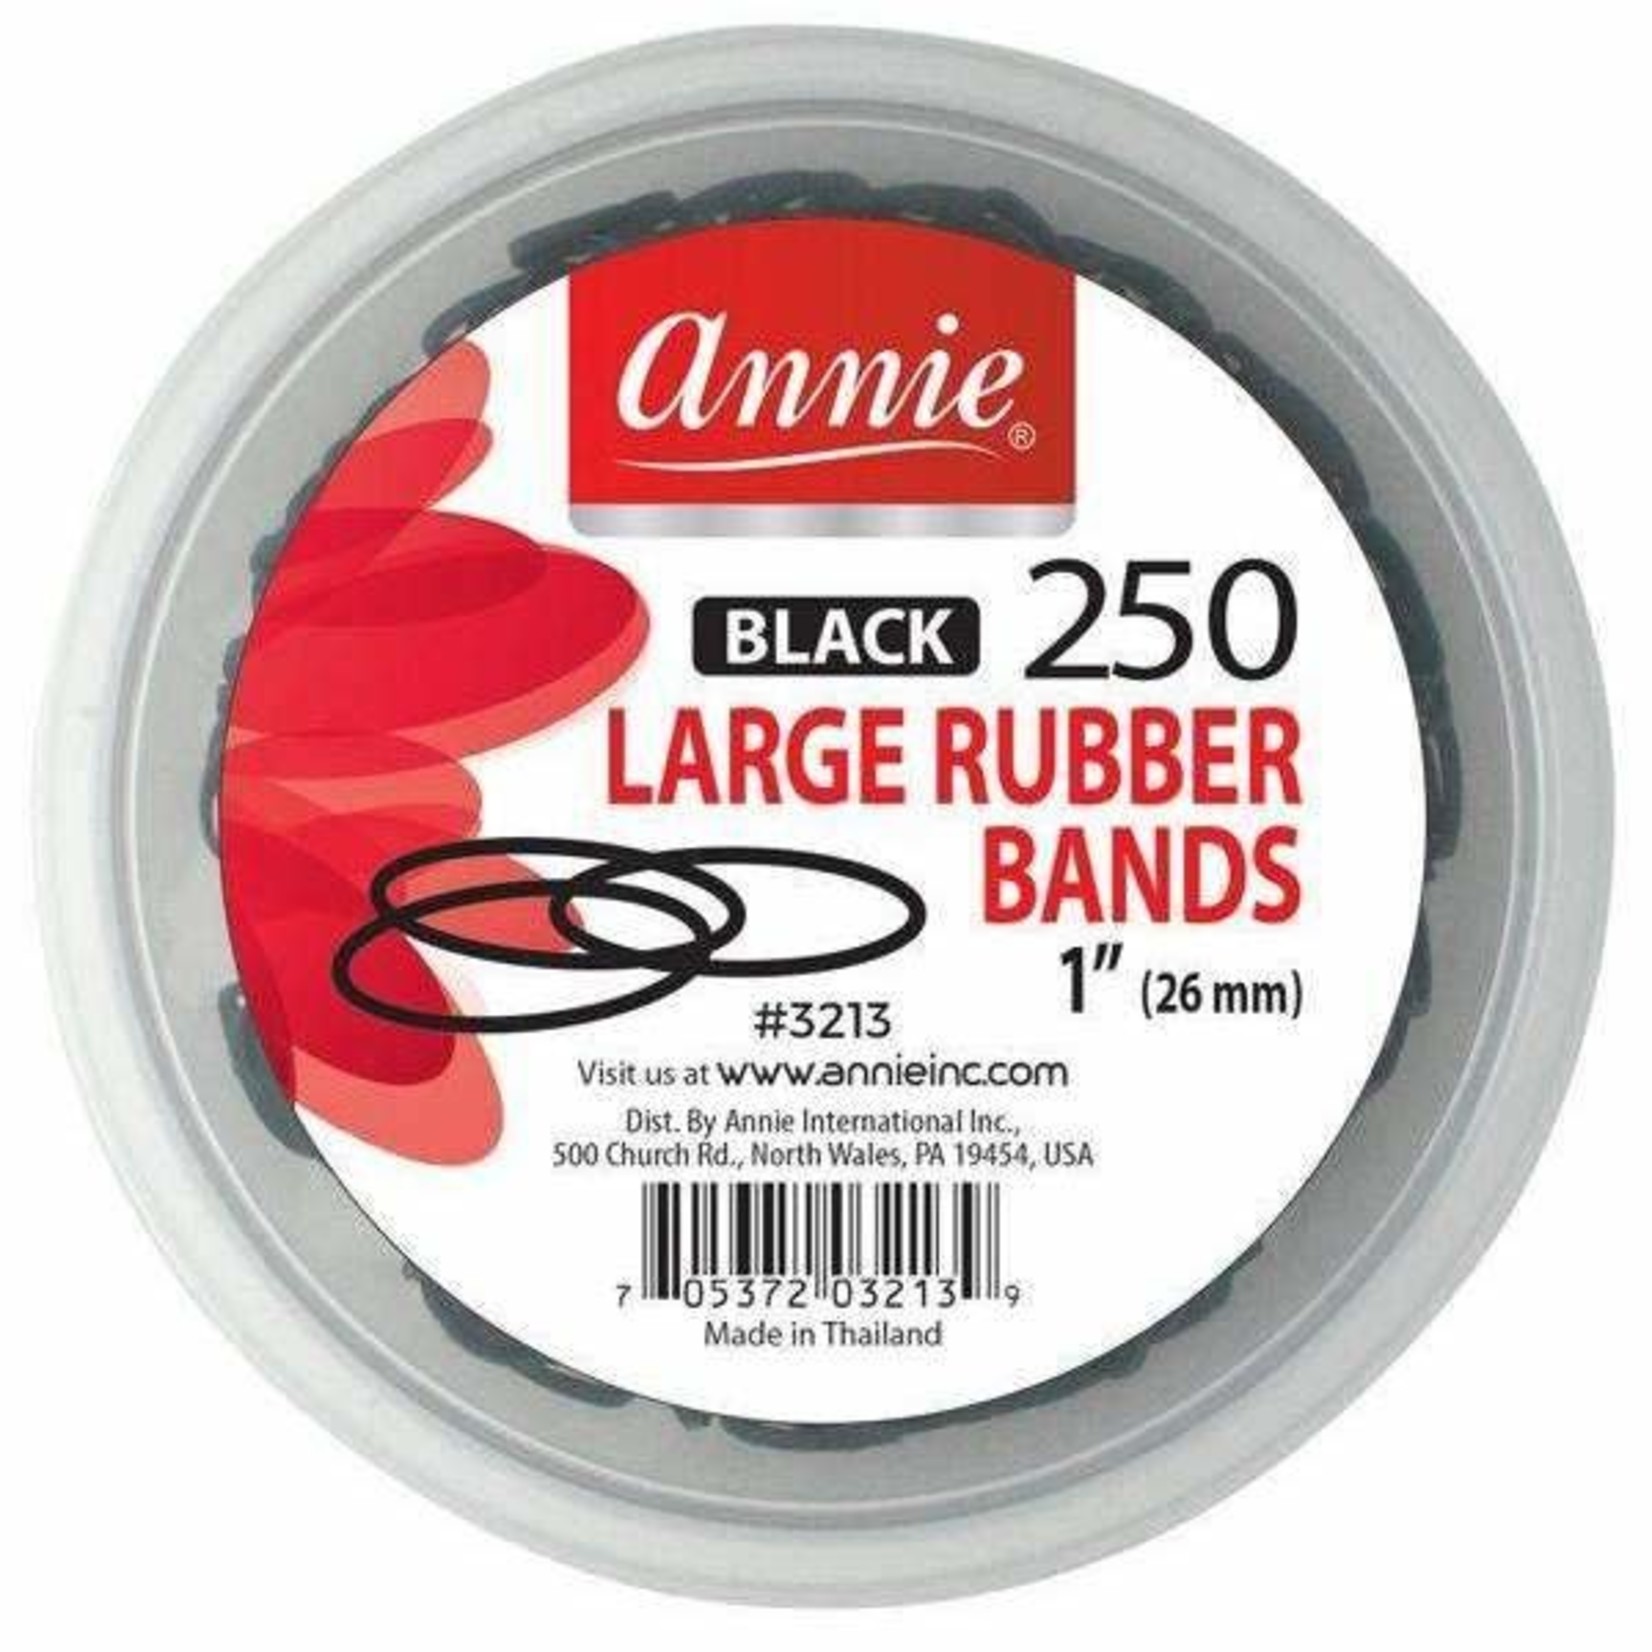 Annie 250 Large Rubber Bands